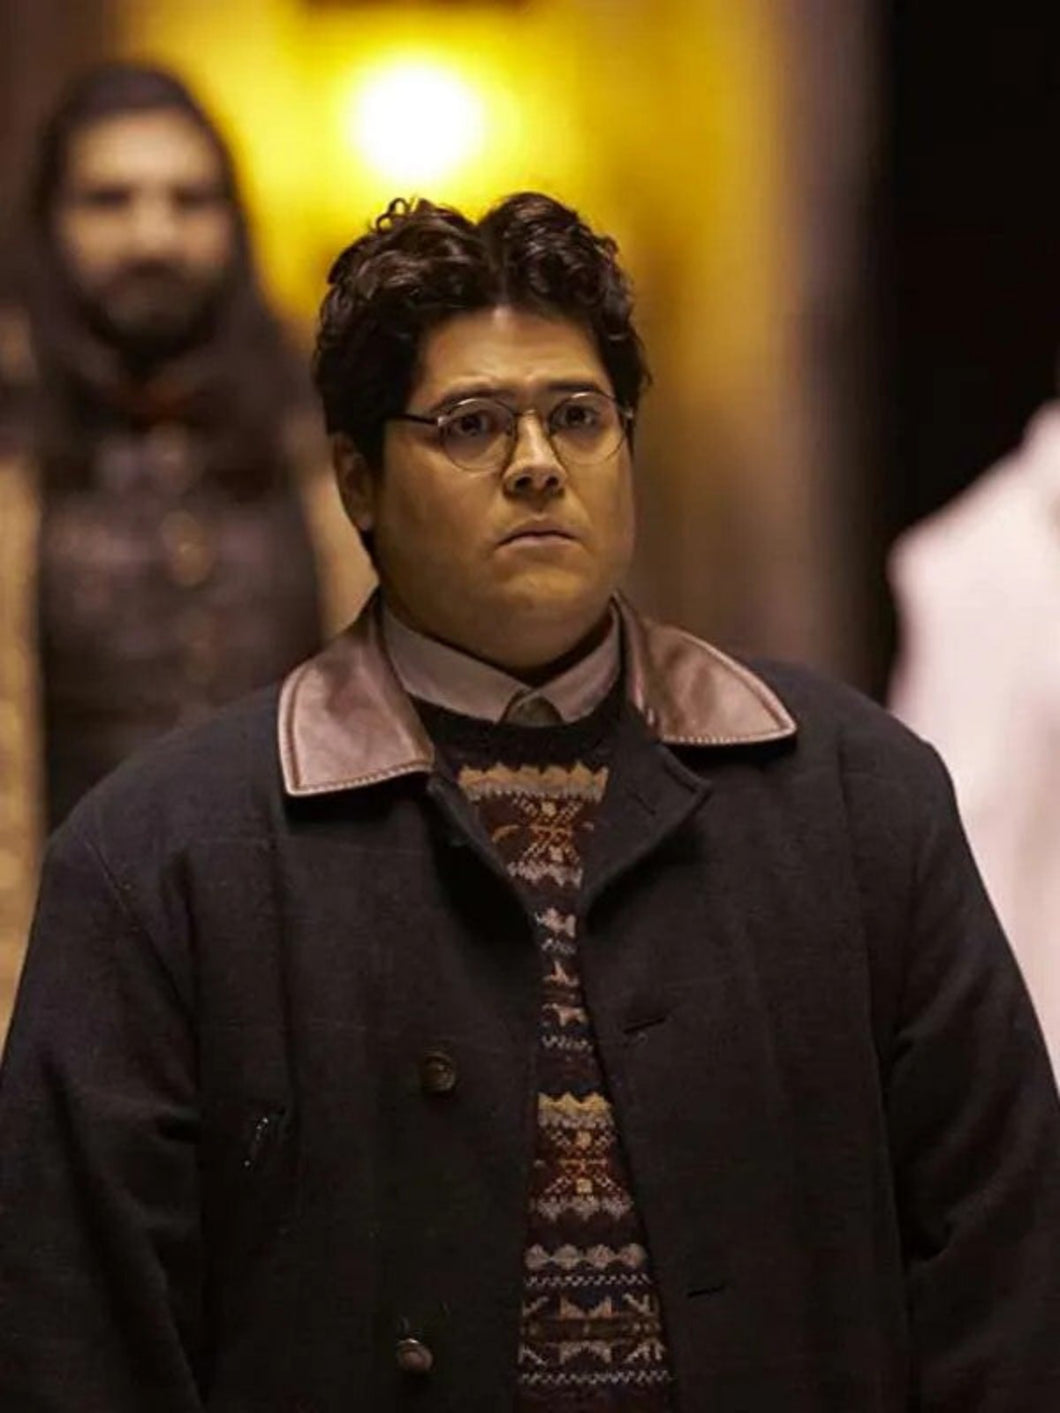 What We Do in the Shadows Harvey Guillen Wool Jacket